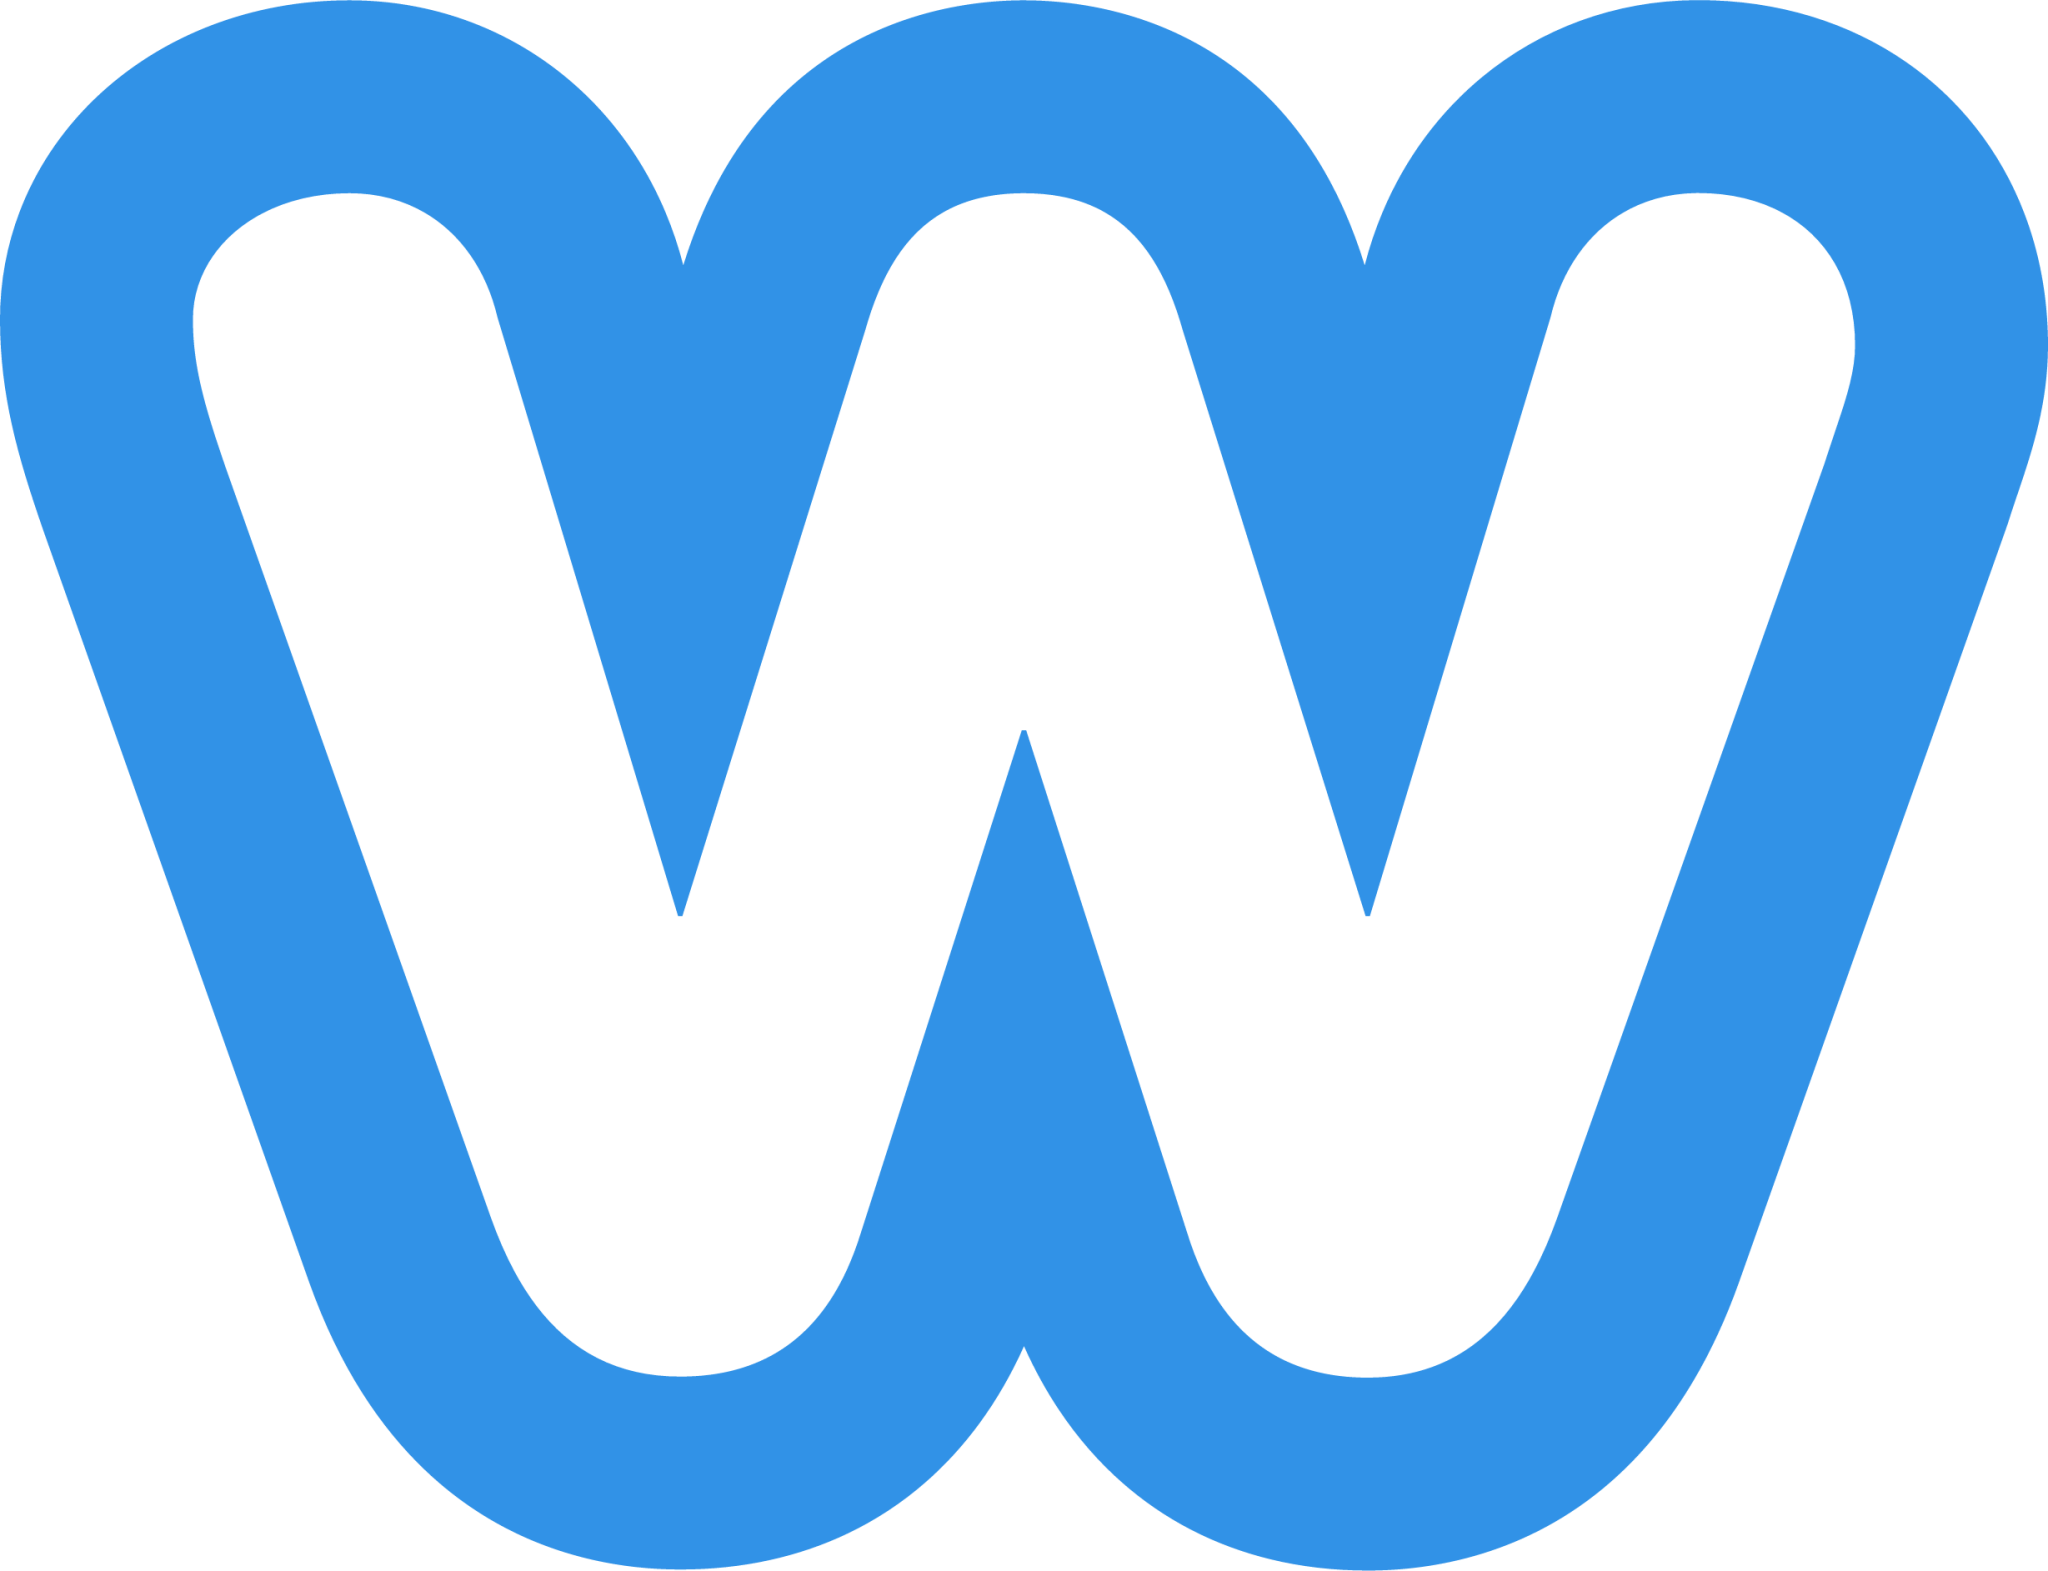 Weebly icon